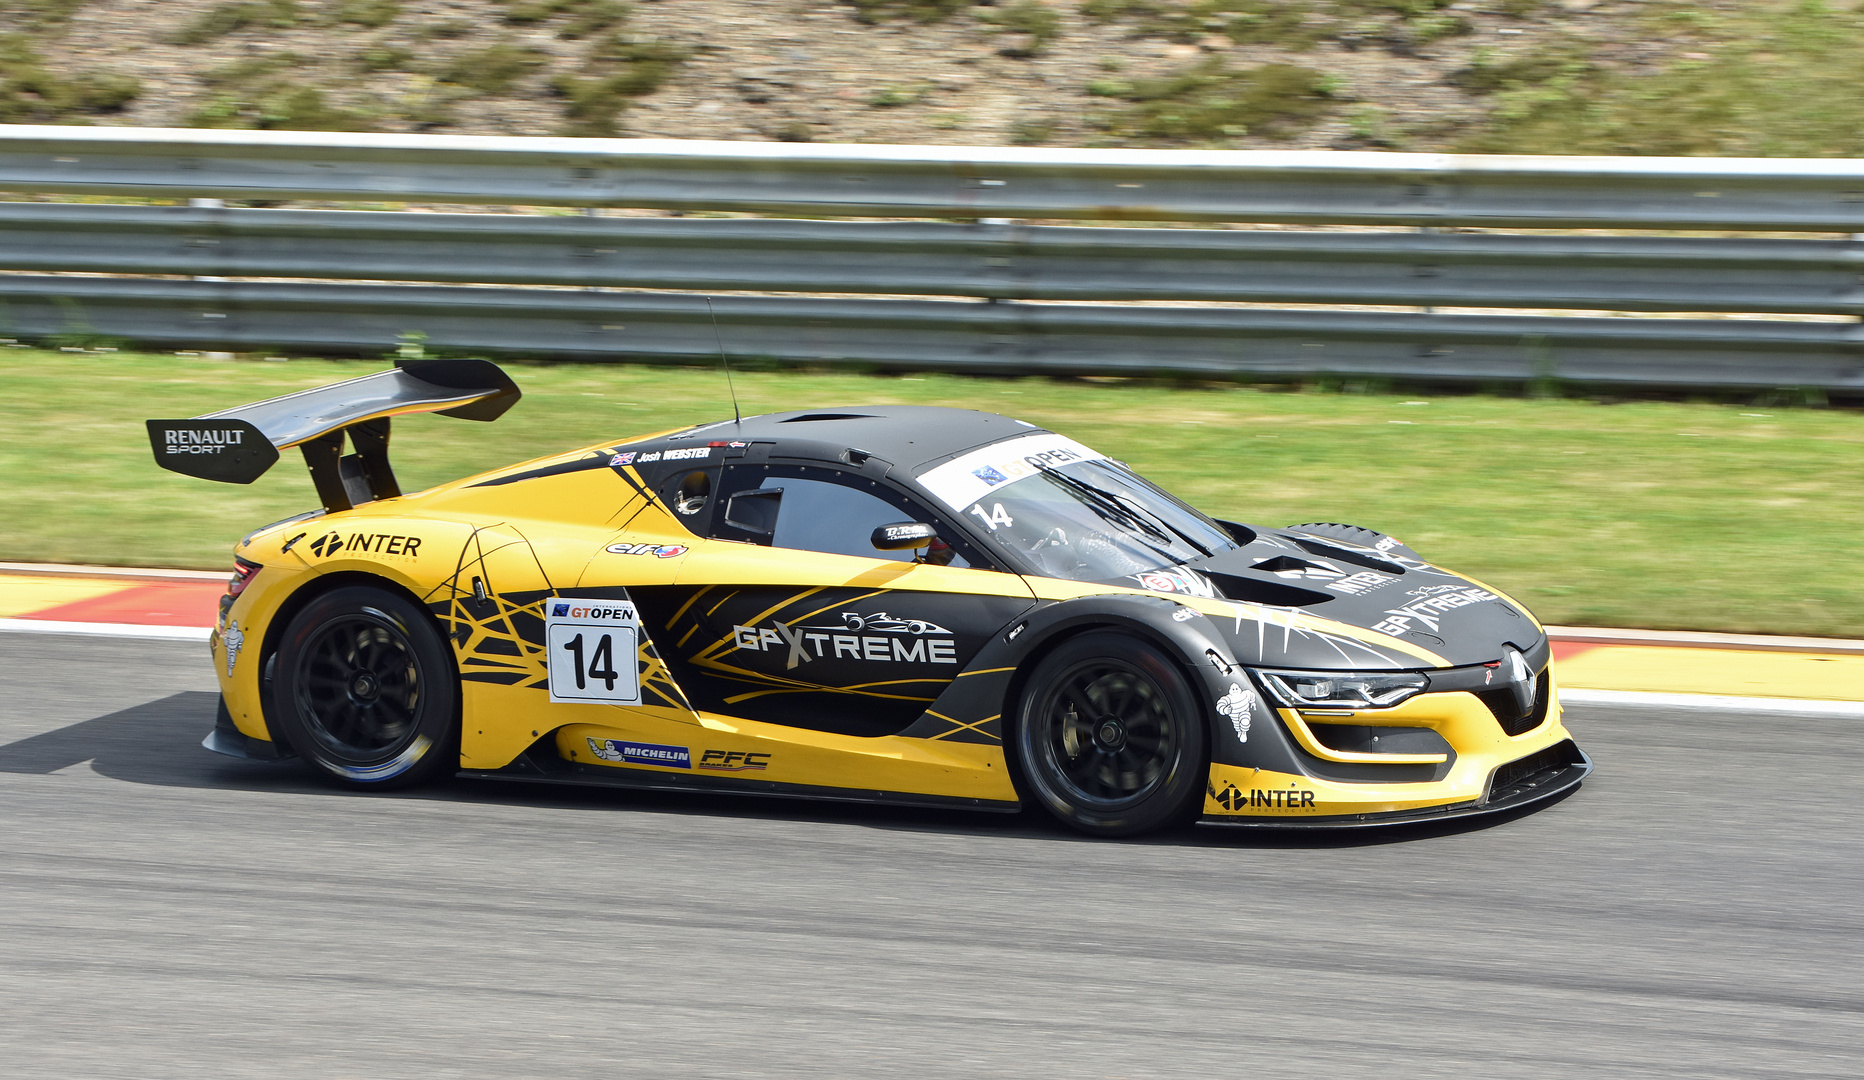 Renault RS01 GT3 